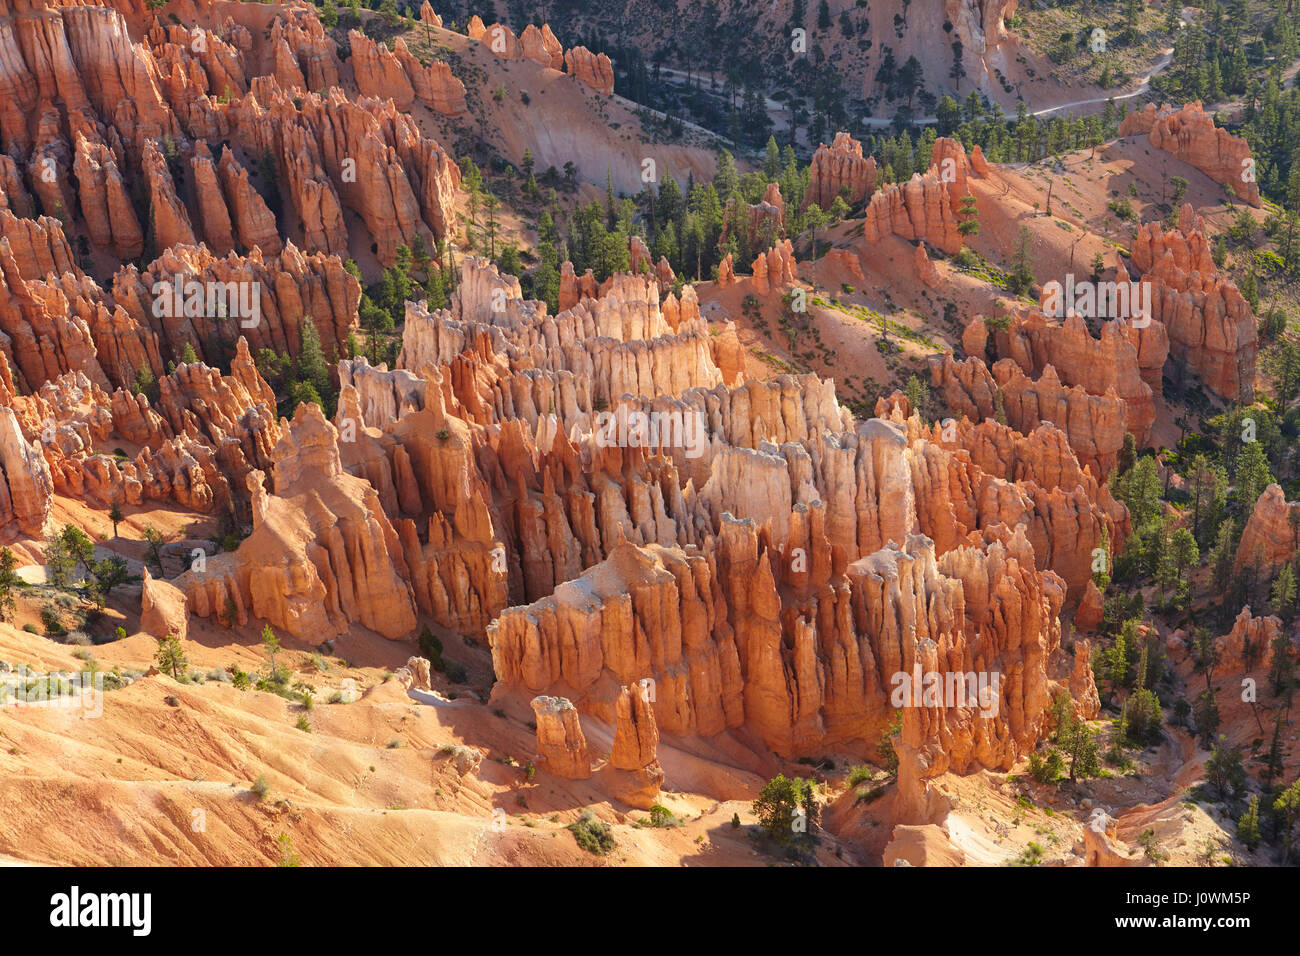 Bryce Canyon, Utah, United States Banque D'Images